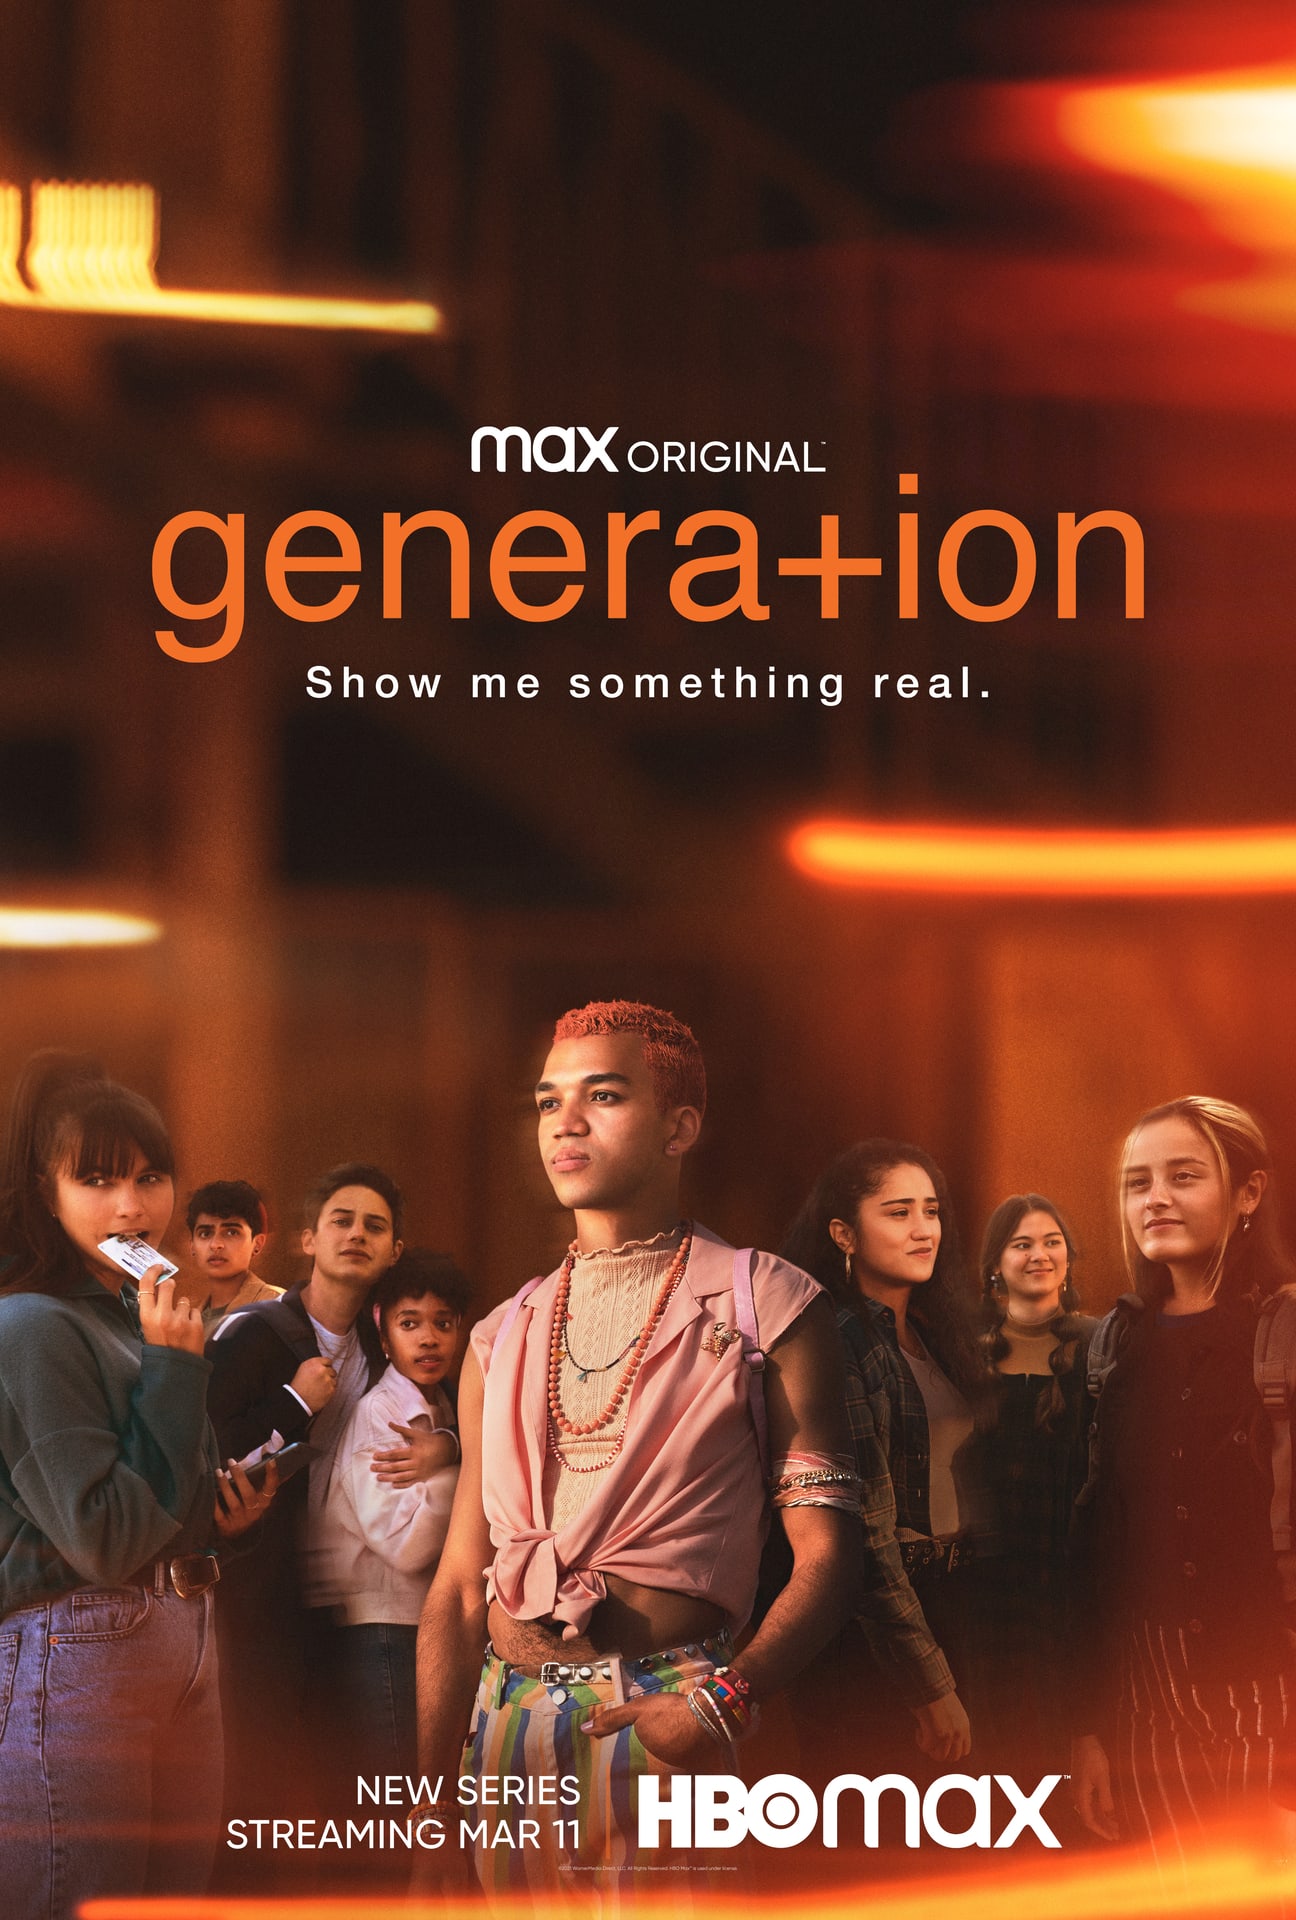 What time will Genera+ion Season 1 premiere on HBO Max?